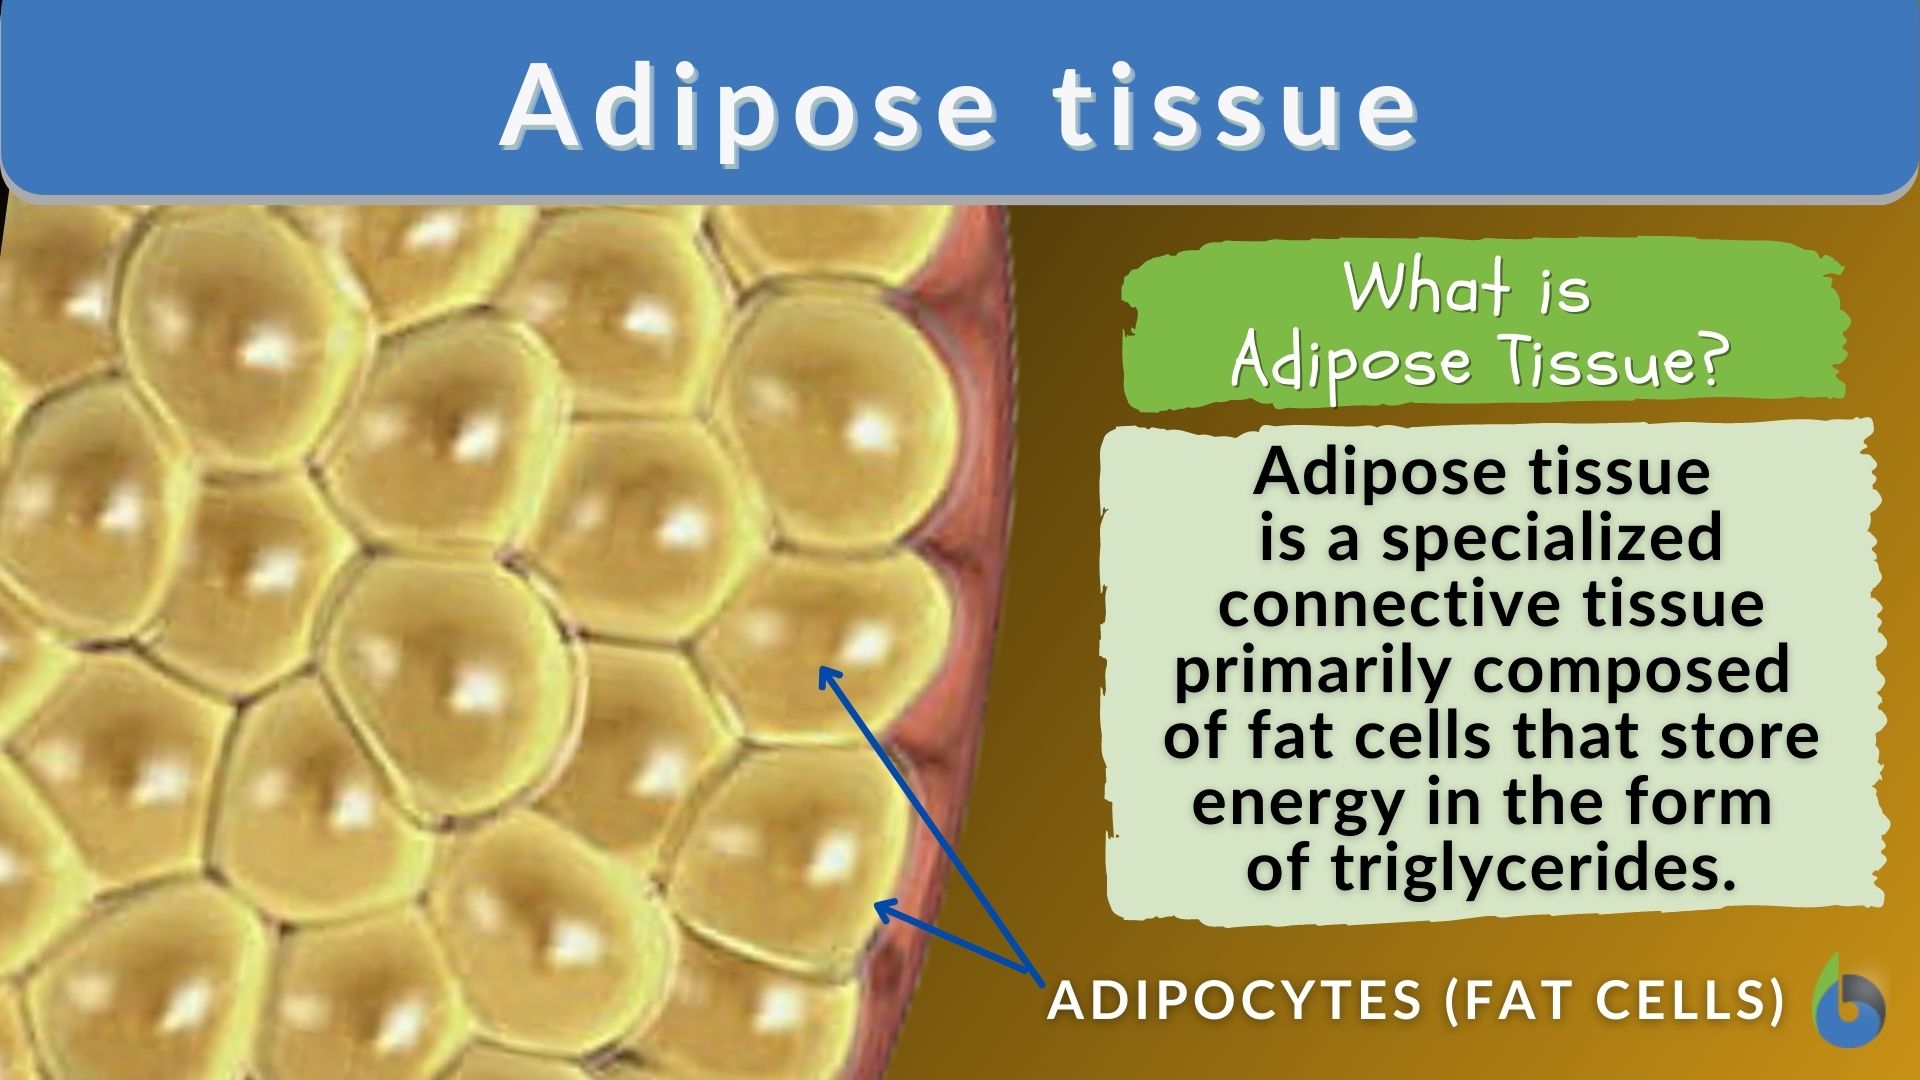 Analysis of adipose tissue between low and high density